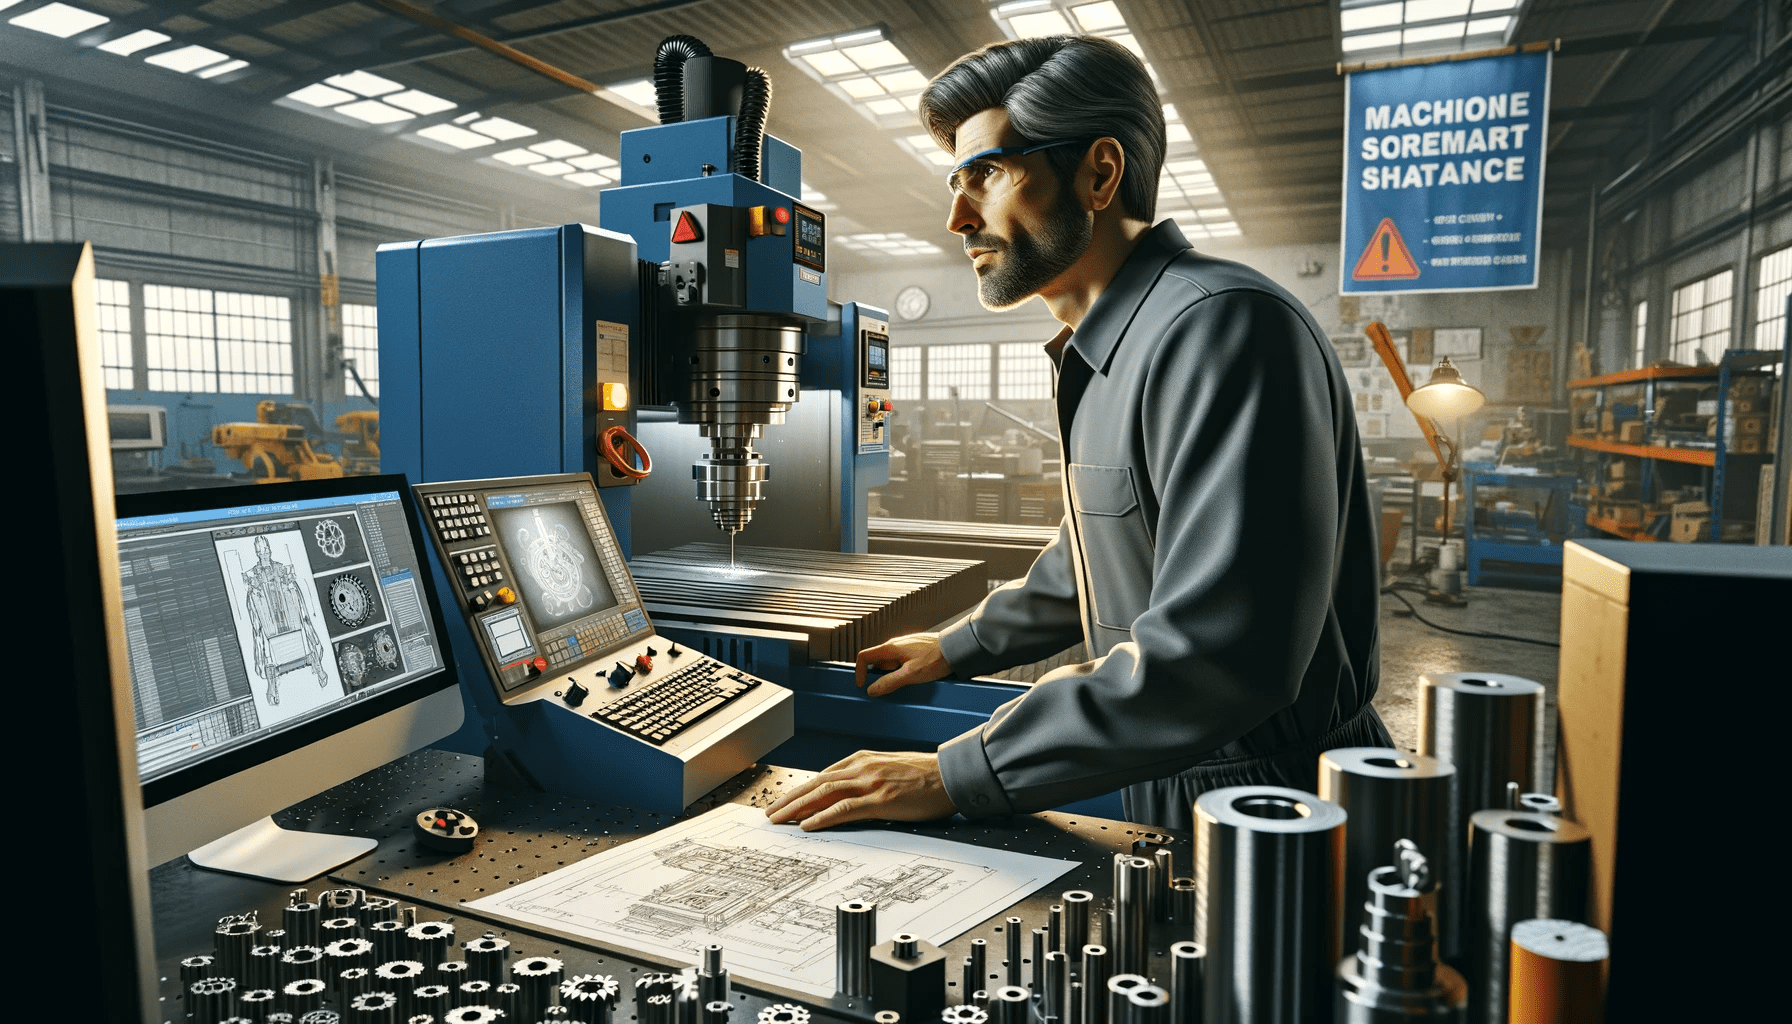 CNC machinist working in a CNC workshop environment. The machinist, a middle-aged Caucasian man, is intently operating a large, (2)